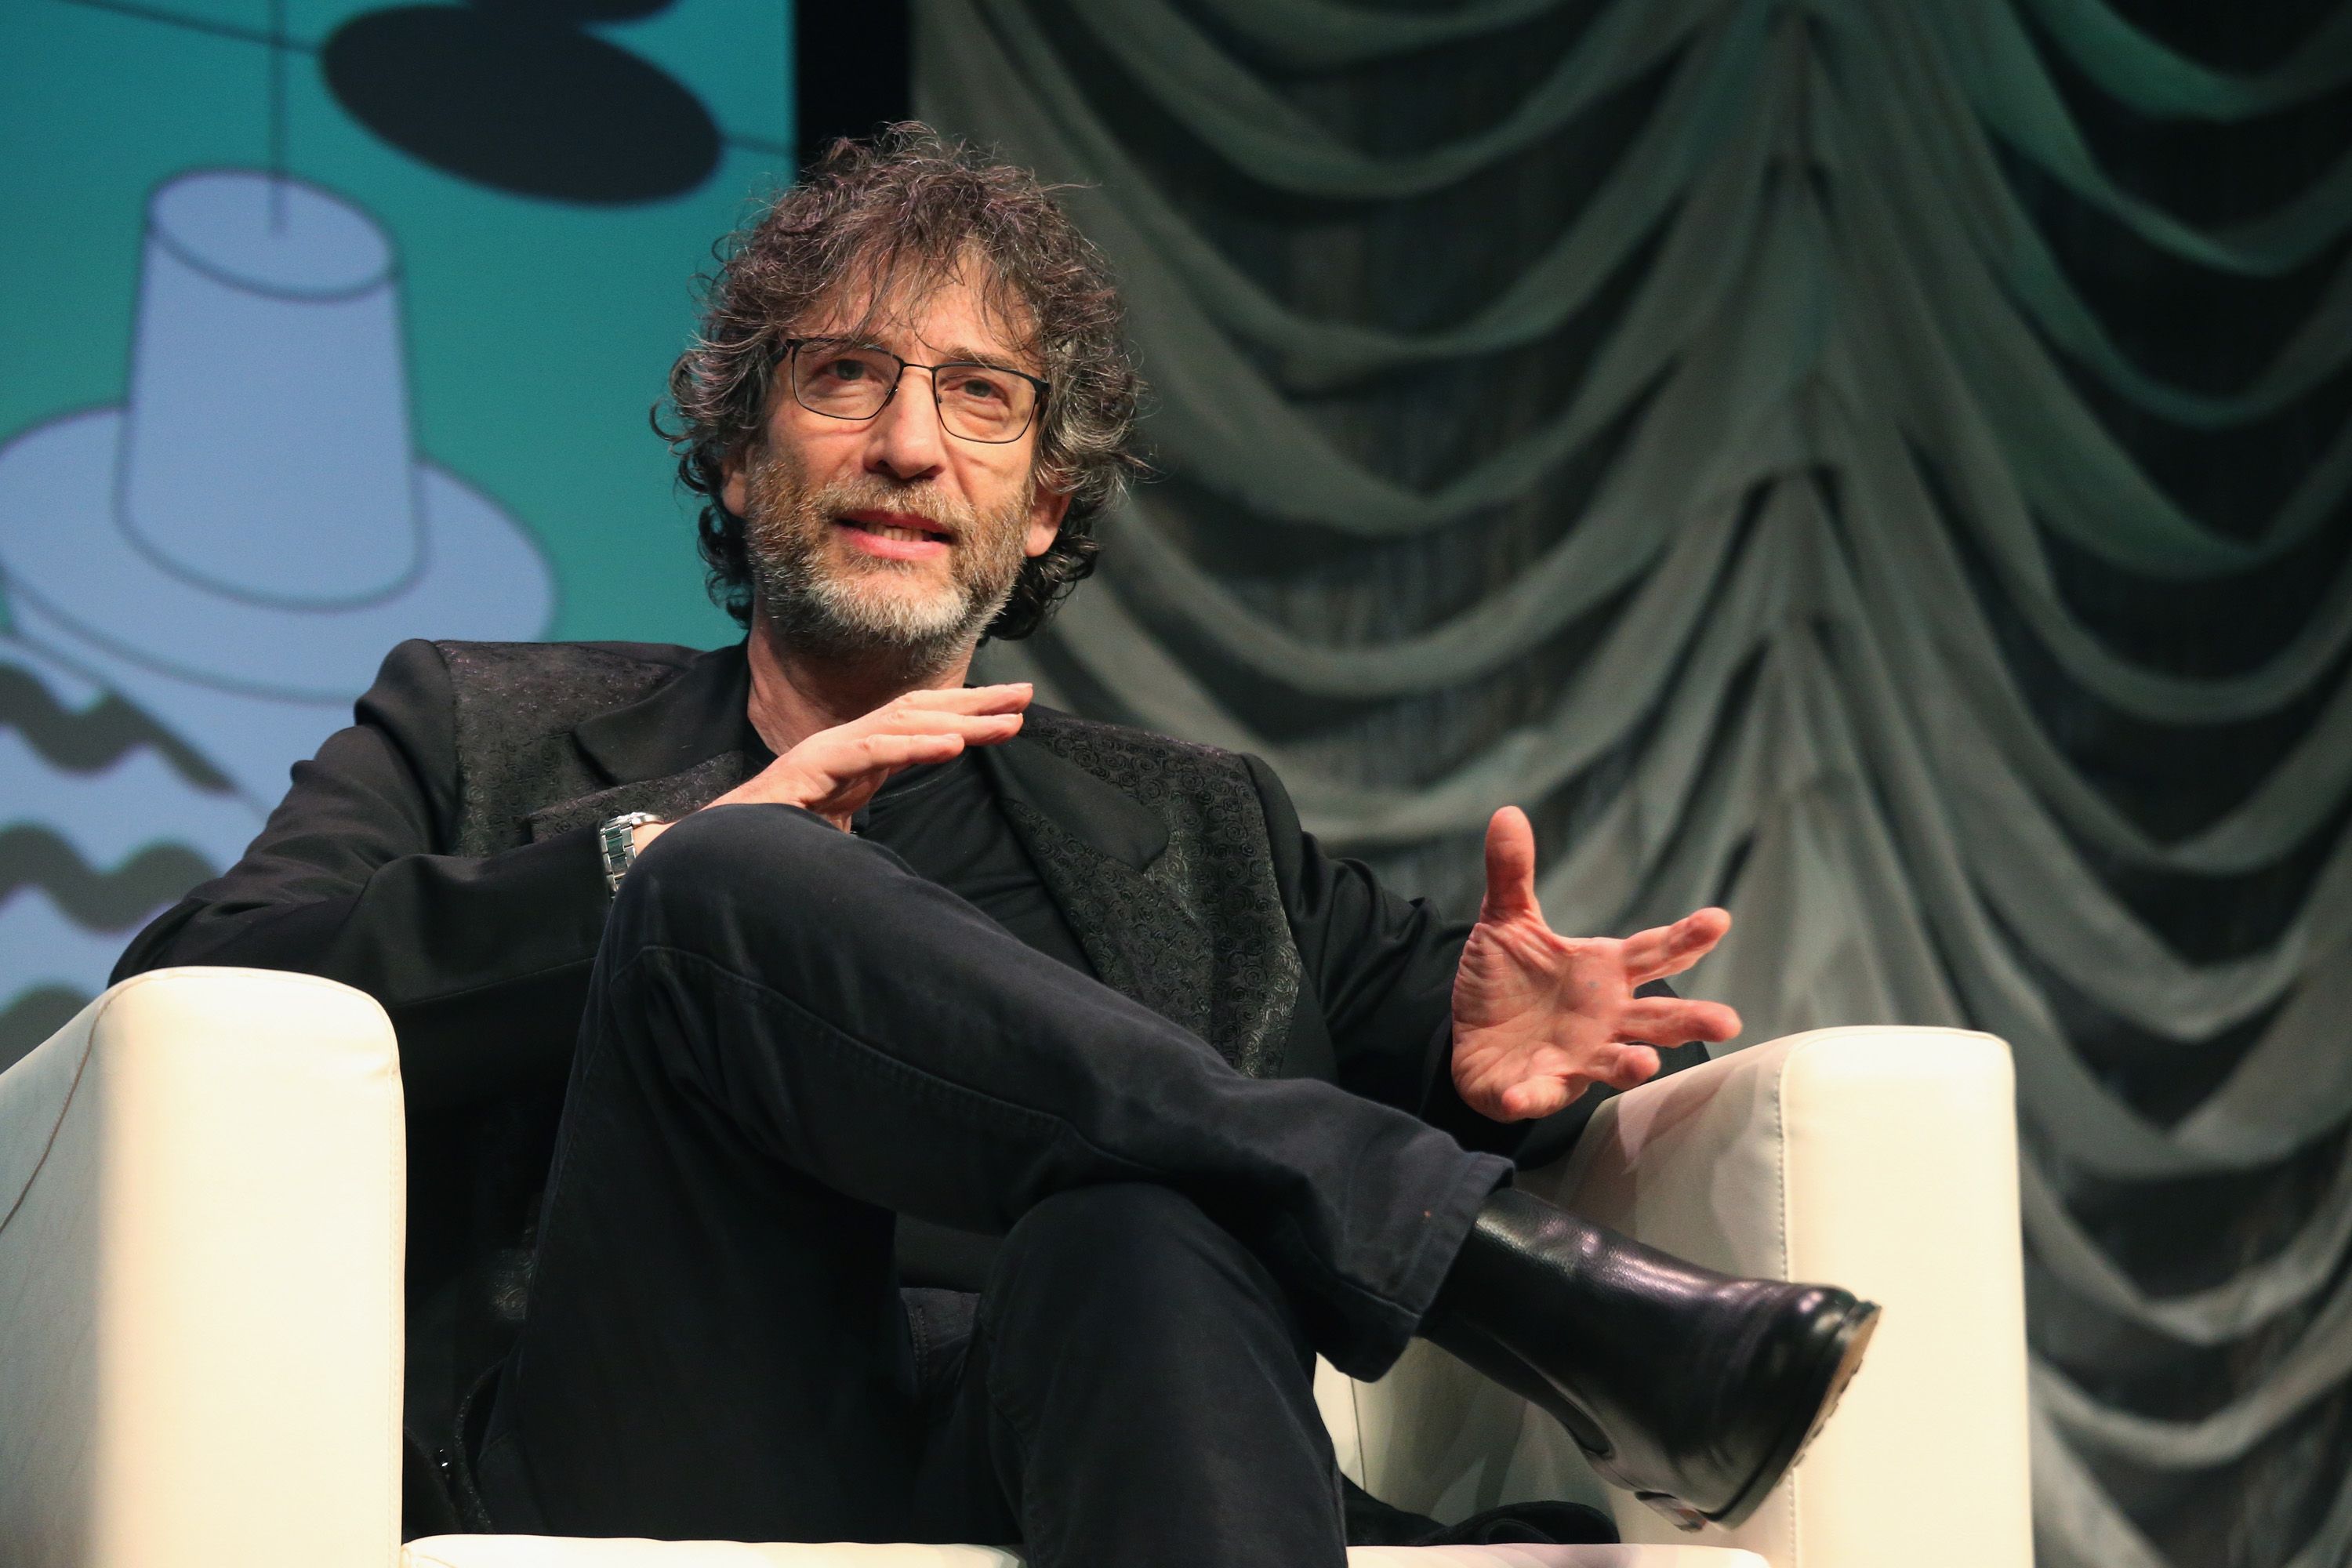 Neil Gaiman: There Are Some Glorious Head Explosions